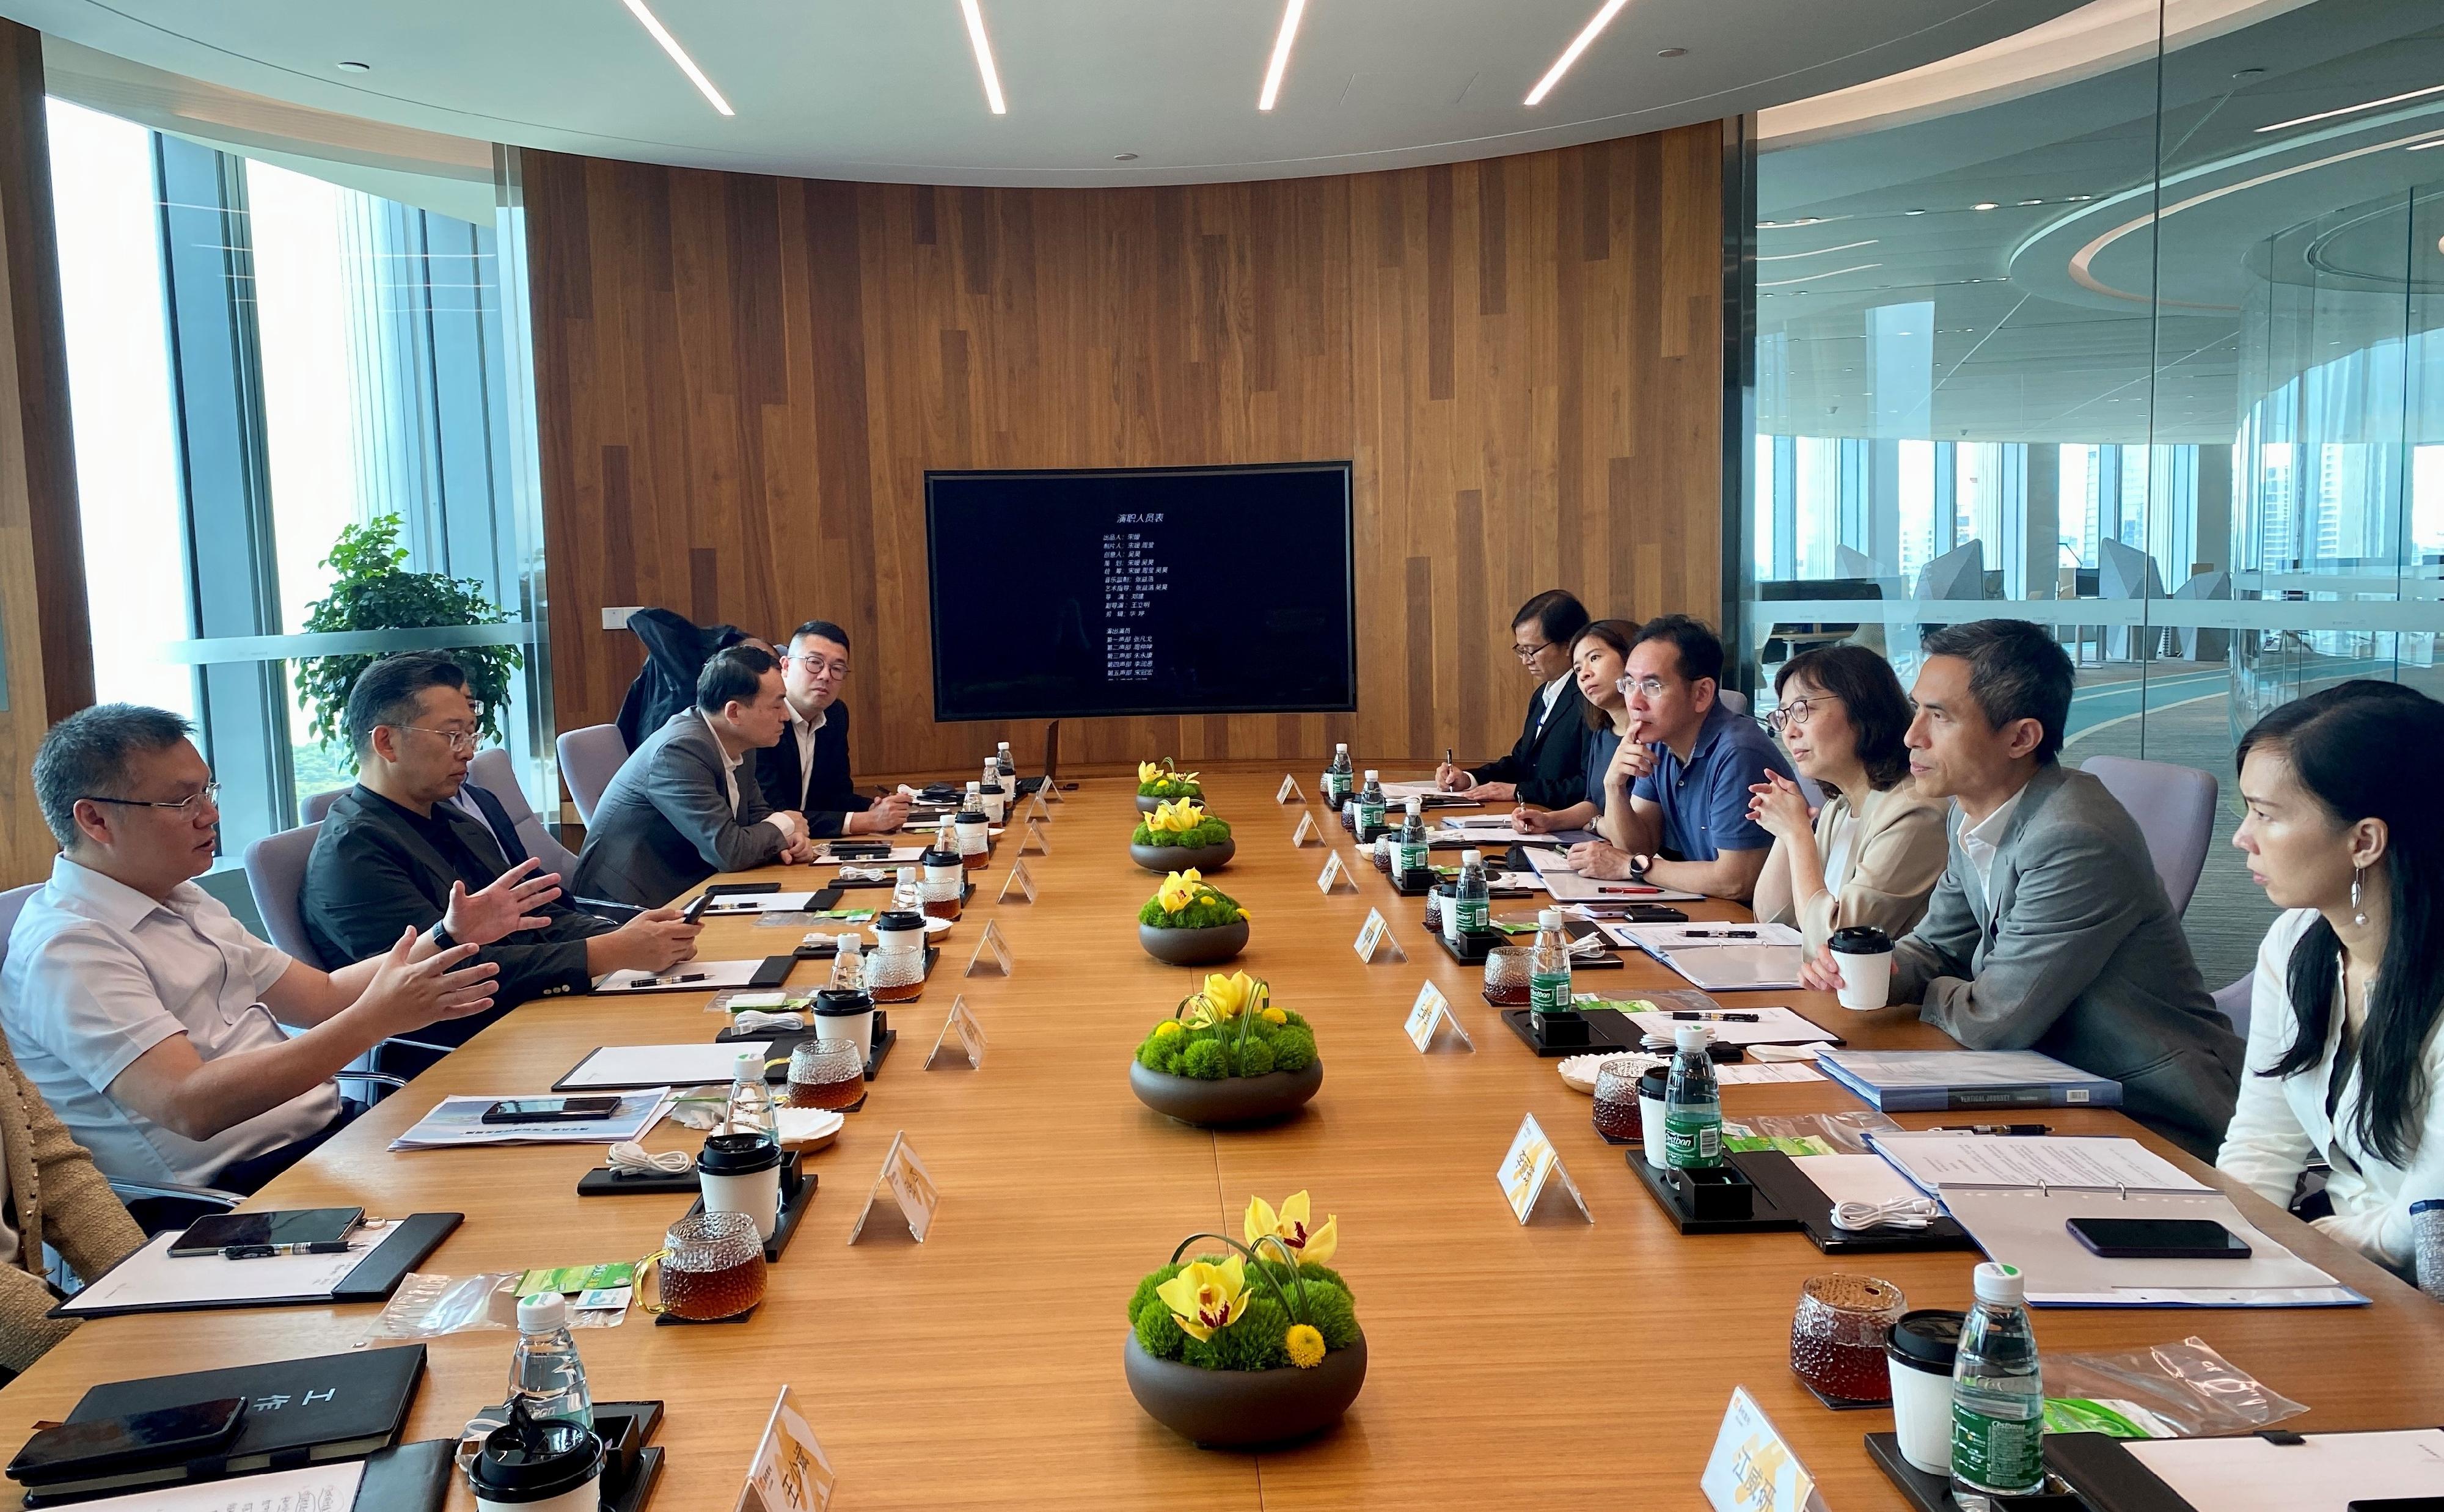 The Secretary for Development, Ms Bernadette Linn, today (June 1) visited Nanshan District in Shenzhen to inspect the development and implementation of local districts in the area. Photo shows Ms Linn (third right); the Under Secretary for Development, Mr David Lam (fourth right); and the Director of the Preparatory Office for Northern Metropolis, Mr Vic Yau (second right), exchanging views with the representatives from the People’s Government of Nanshan District and the developer .